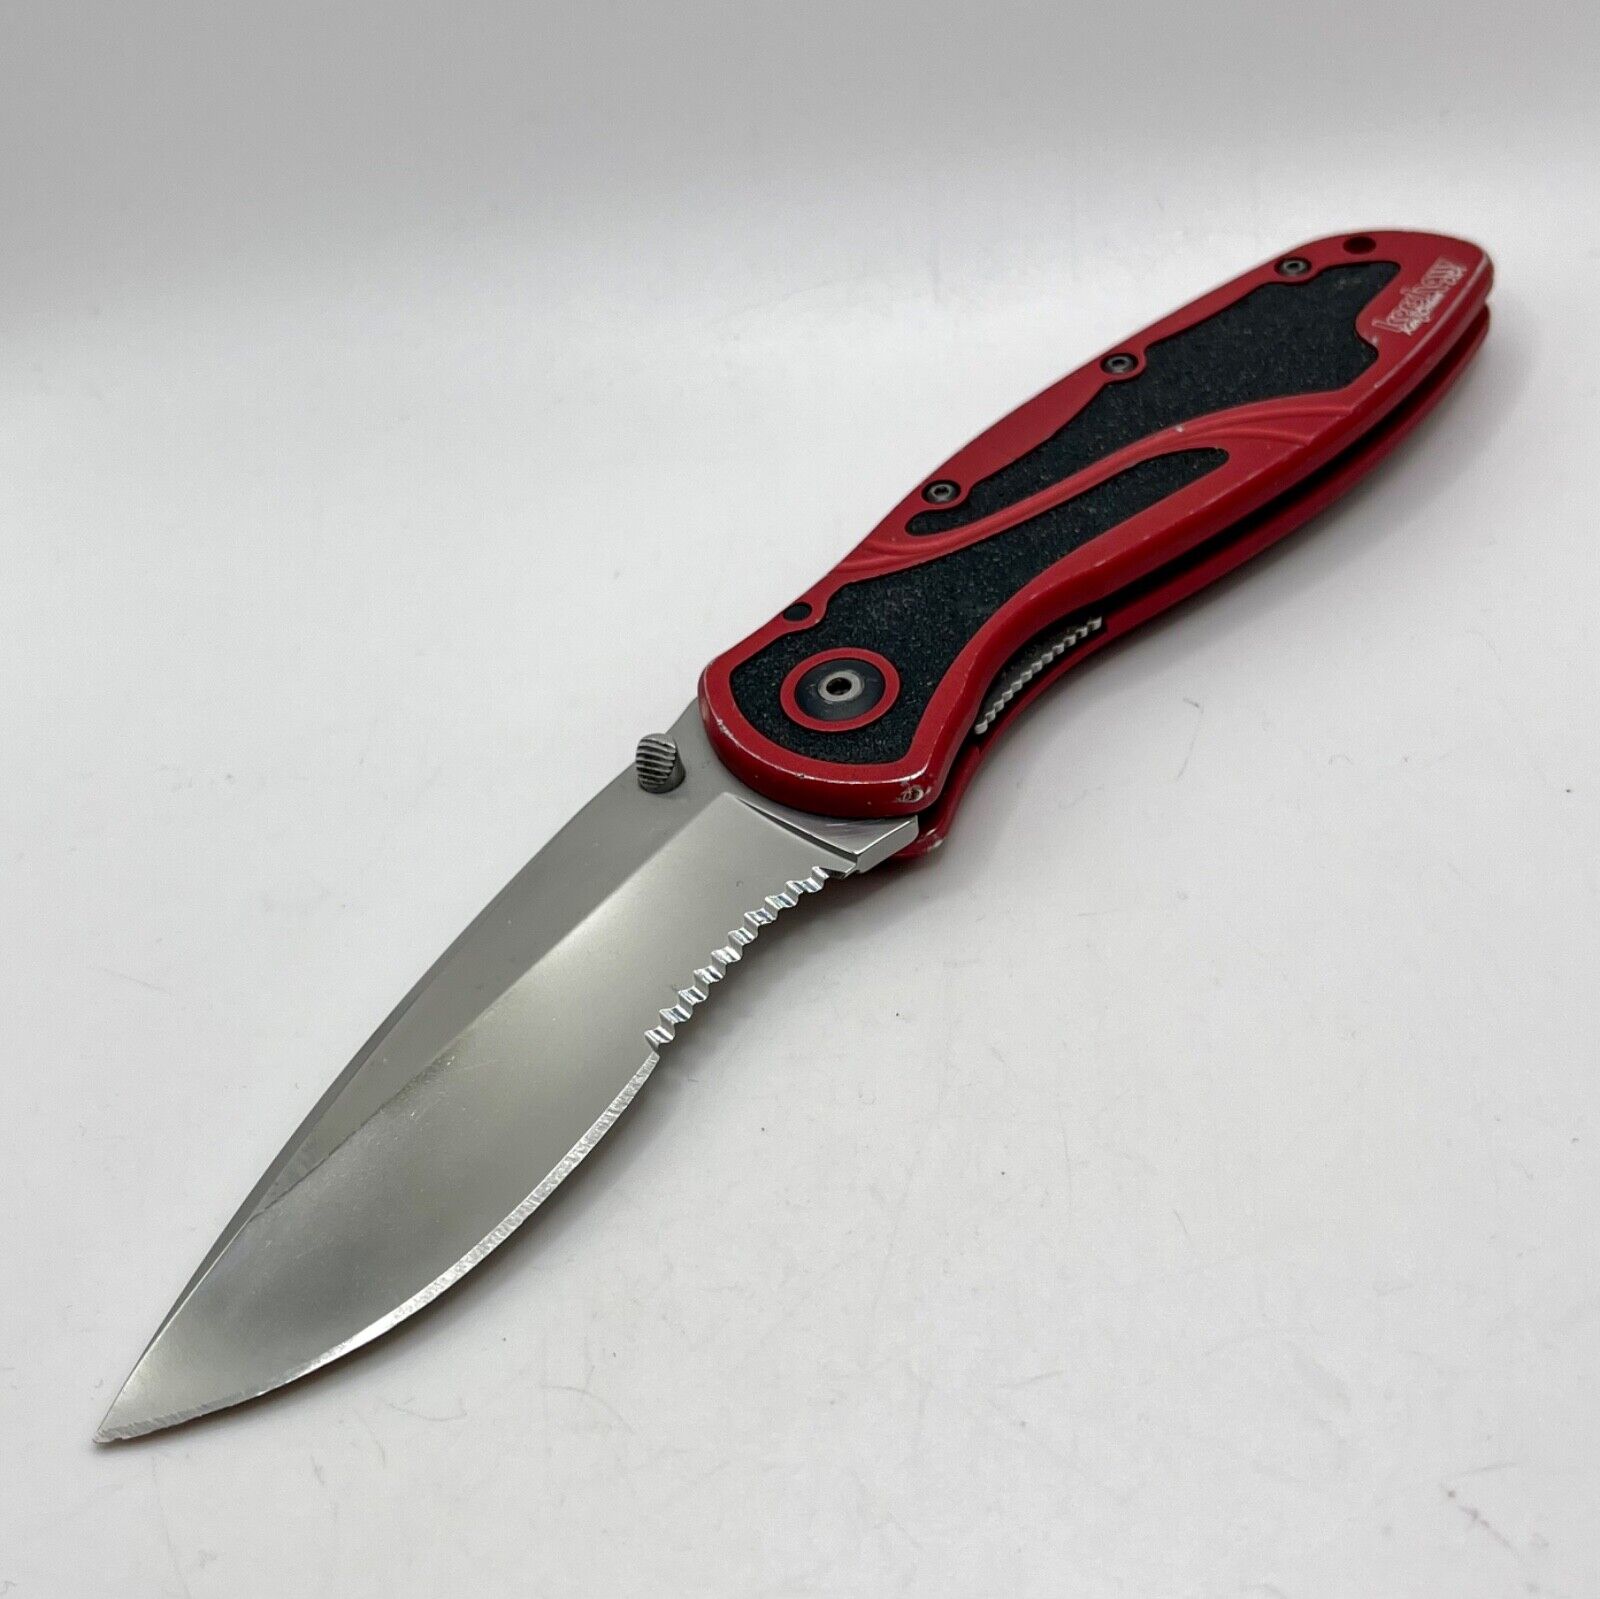 Kershaw Blur 1670RDST - Rare Red Discontinued Knife 1670 - Great condition